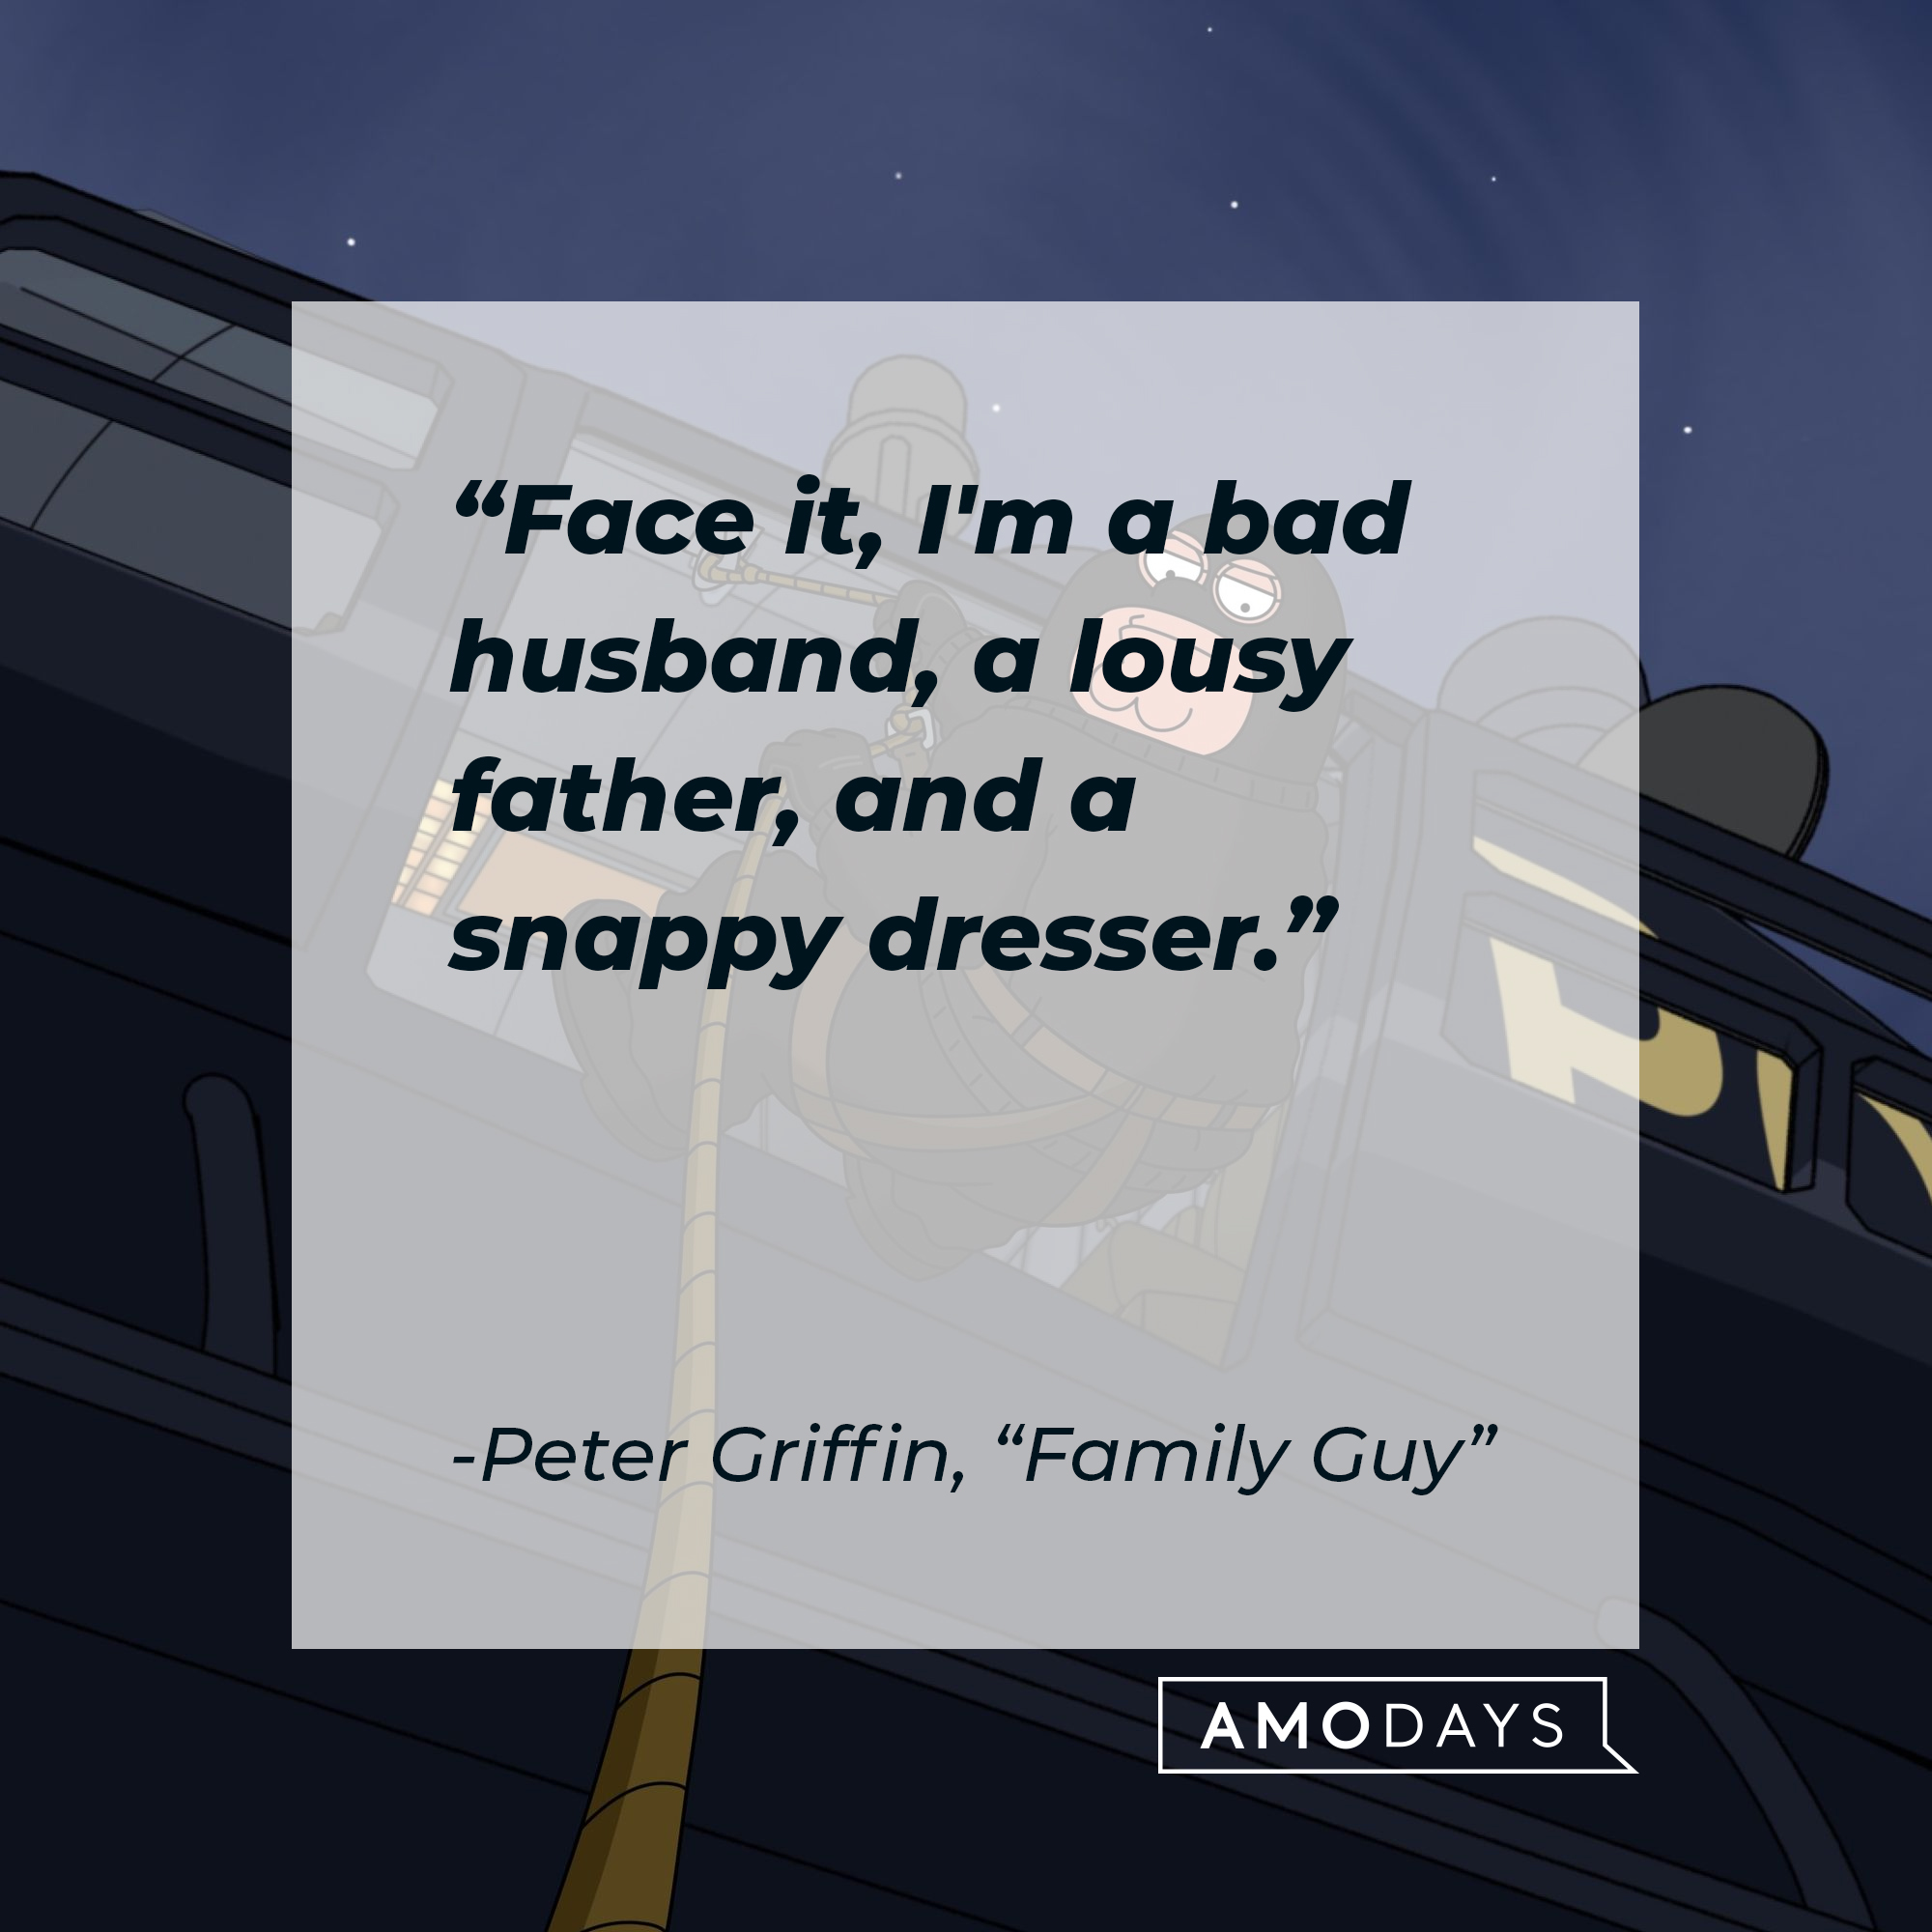 Peter Griffin's quote: "Face it, I'm a bad husband, a lousy father, and a snappy dresser." | Source: facebook.com/FamilyGuy